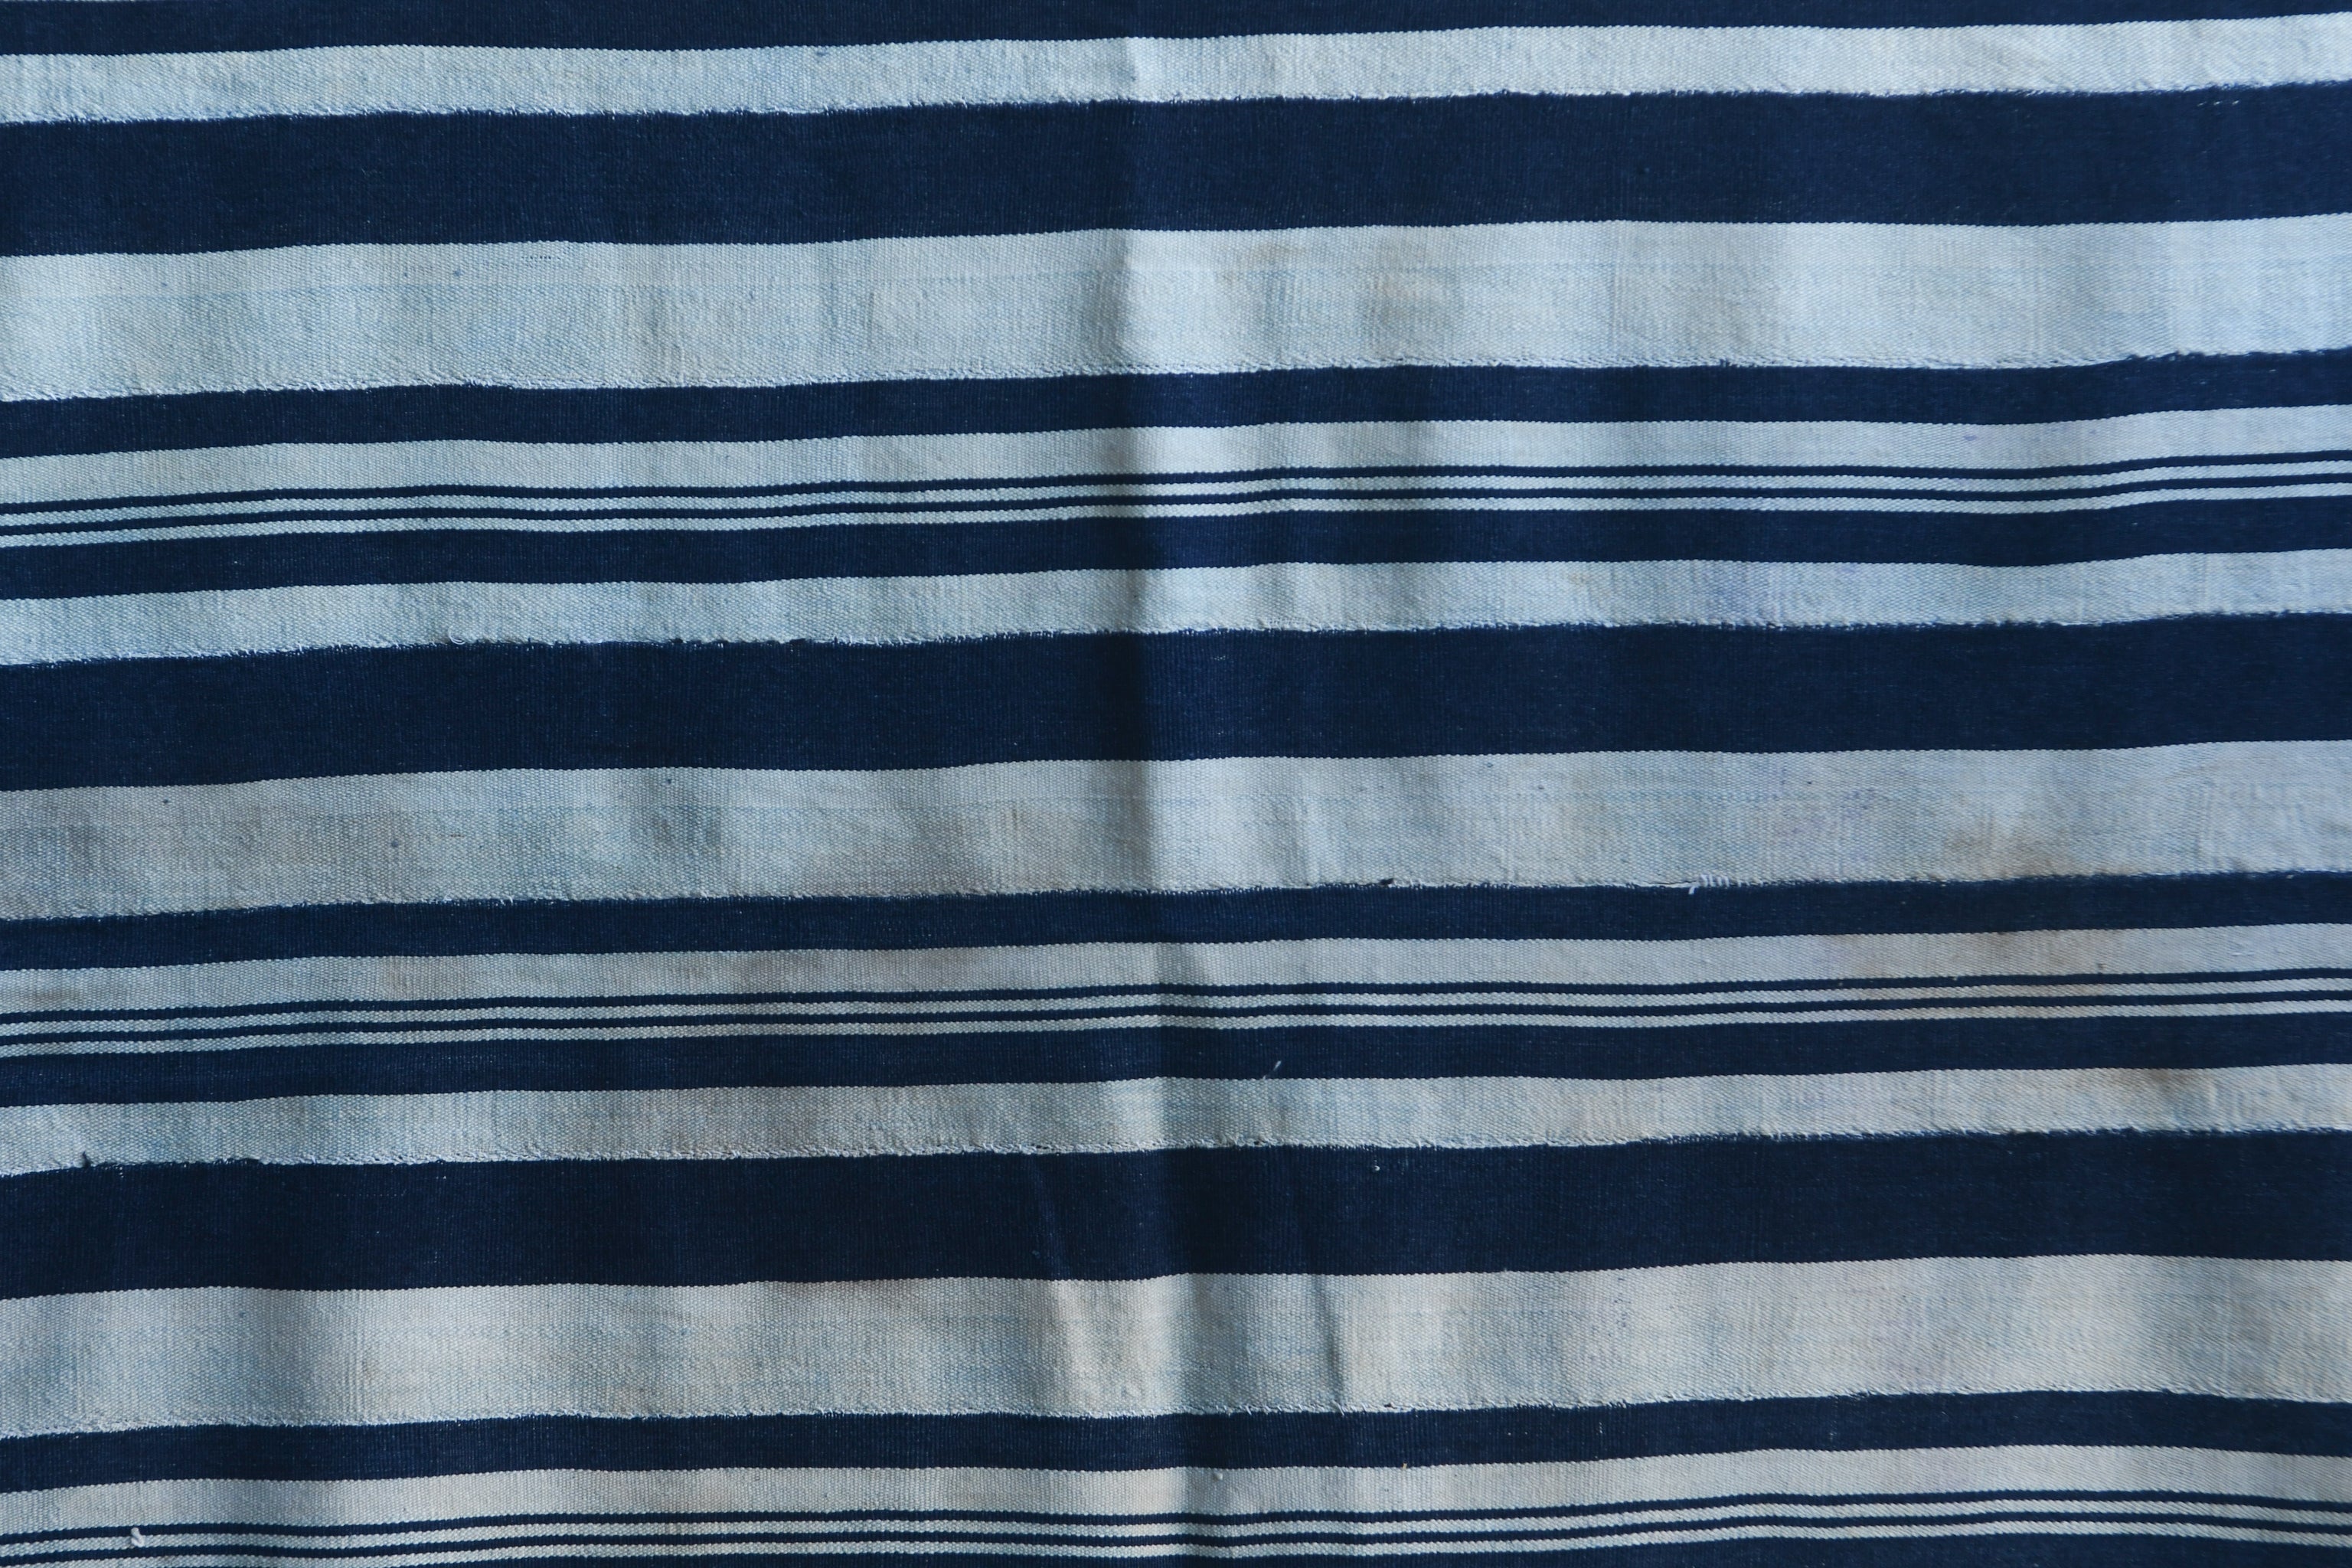 Handcrafted Textiles - Handmade - Contemporary - African Art - Home Decor - Living - African Indigo Textile - Tie Dyed Design - Blue White Stripes - Vintage Look - Crafted 100% Cotton Fabric - Stylish Garments - Home Decor - Timeless Style